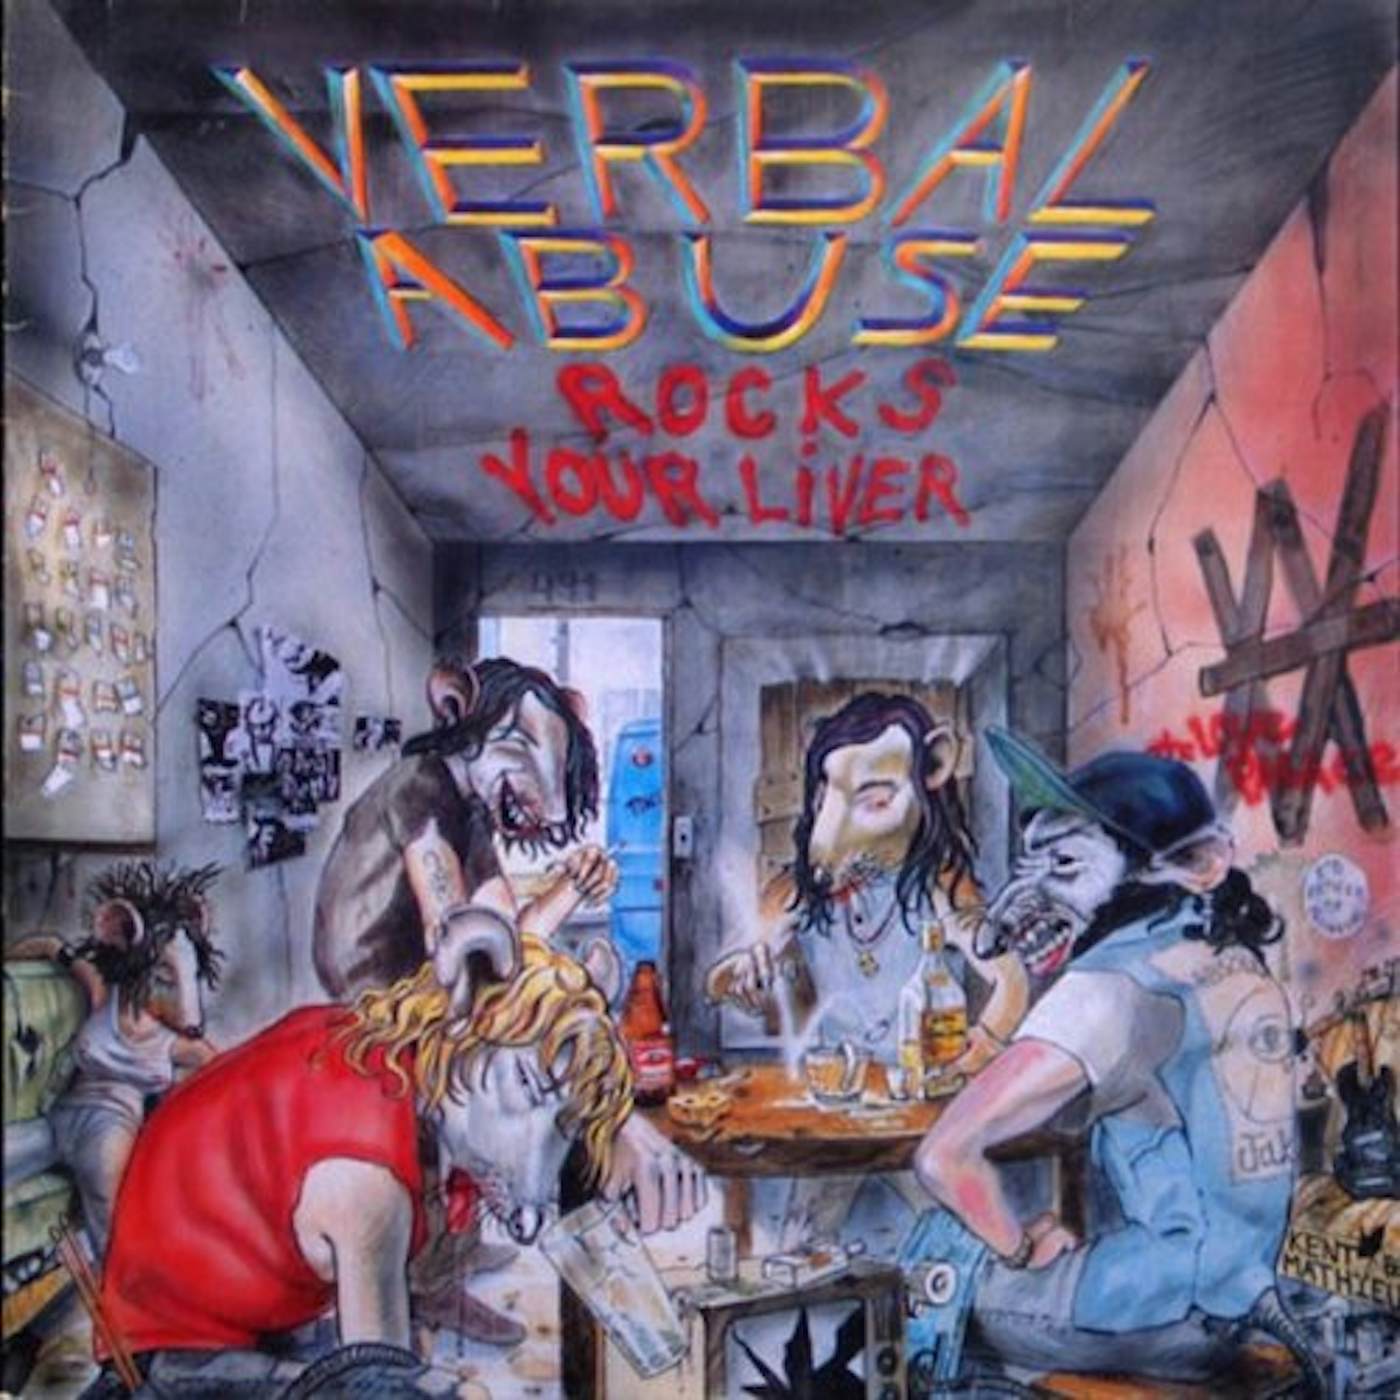 VERBAL ABUSE ROCKS YOUR LIVER Vinyl Record